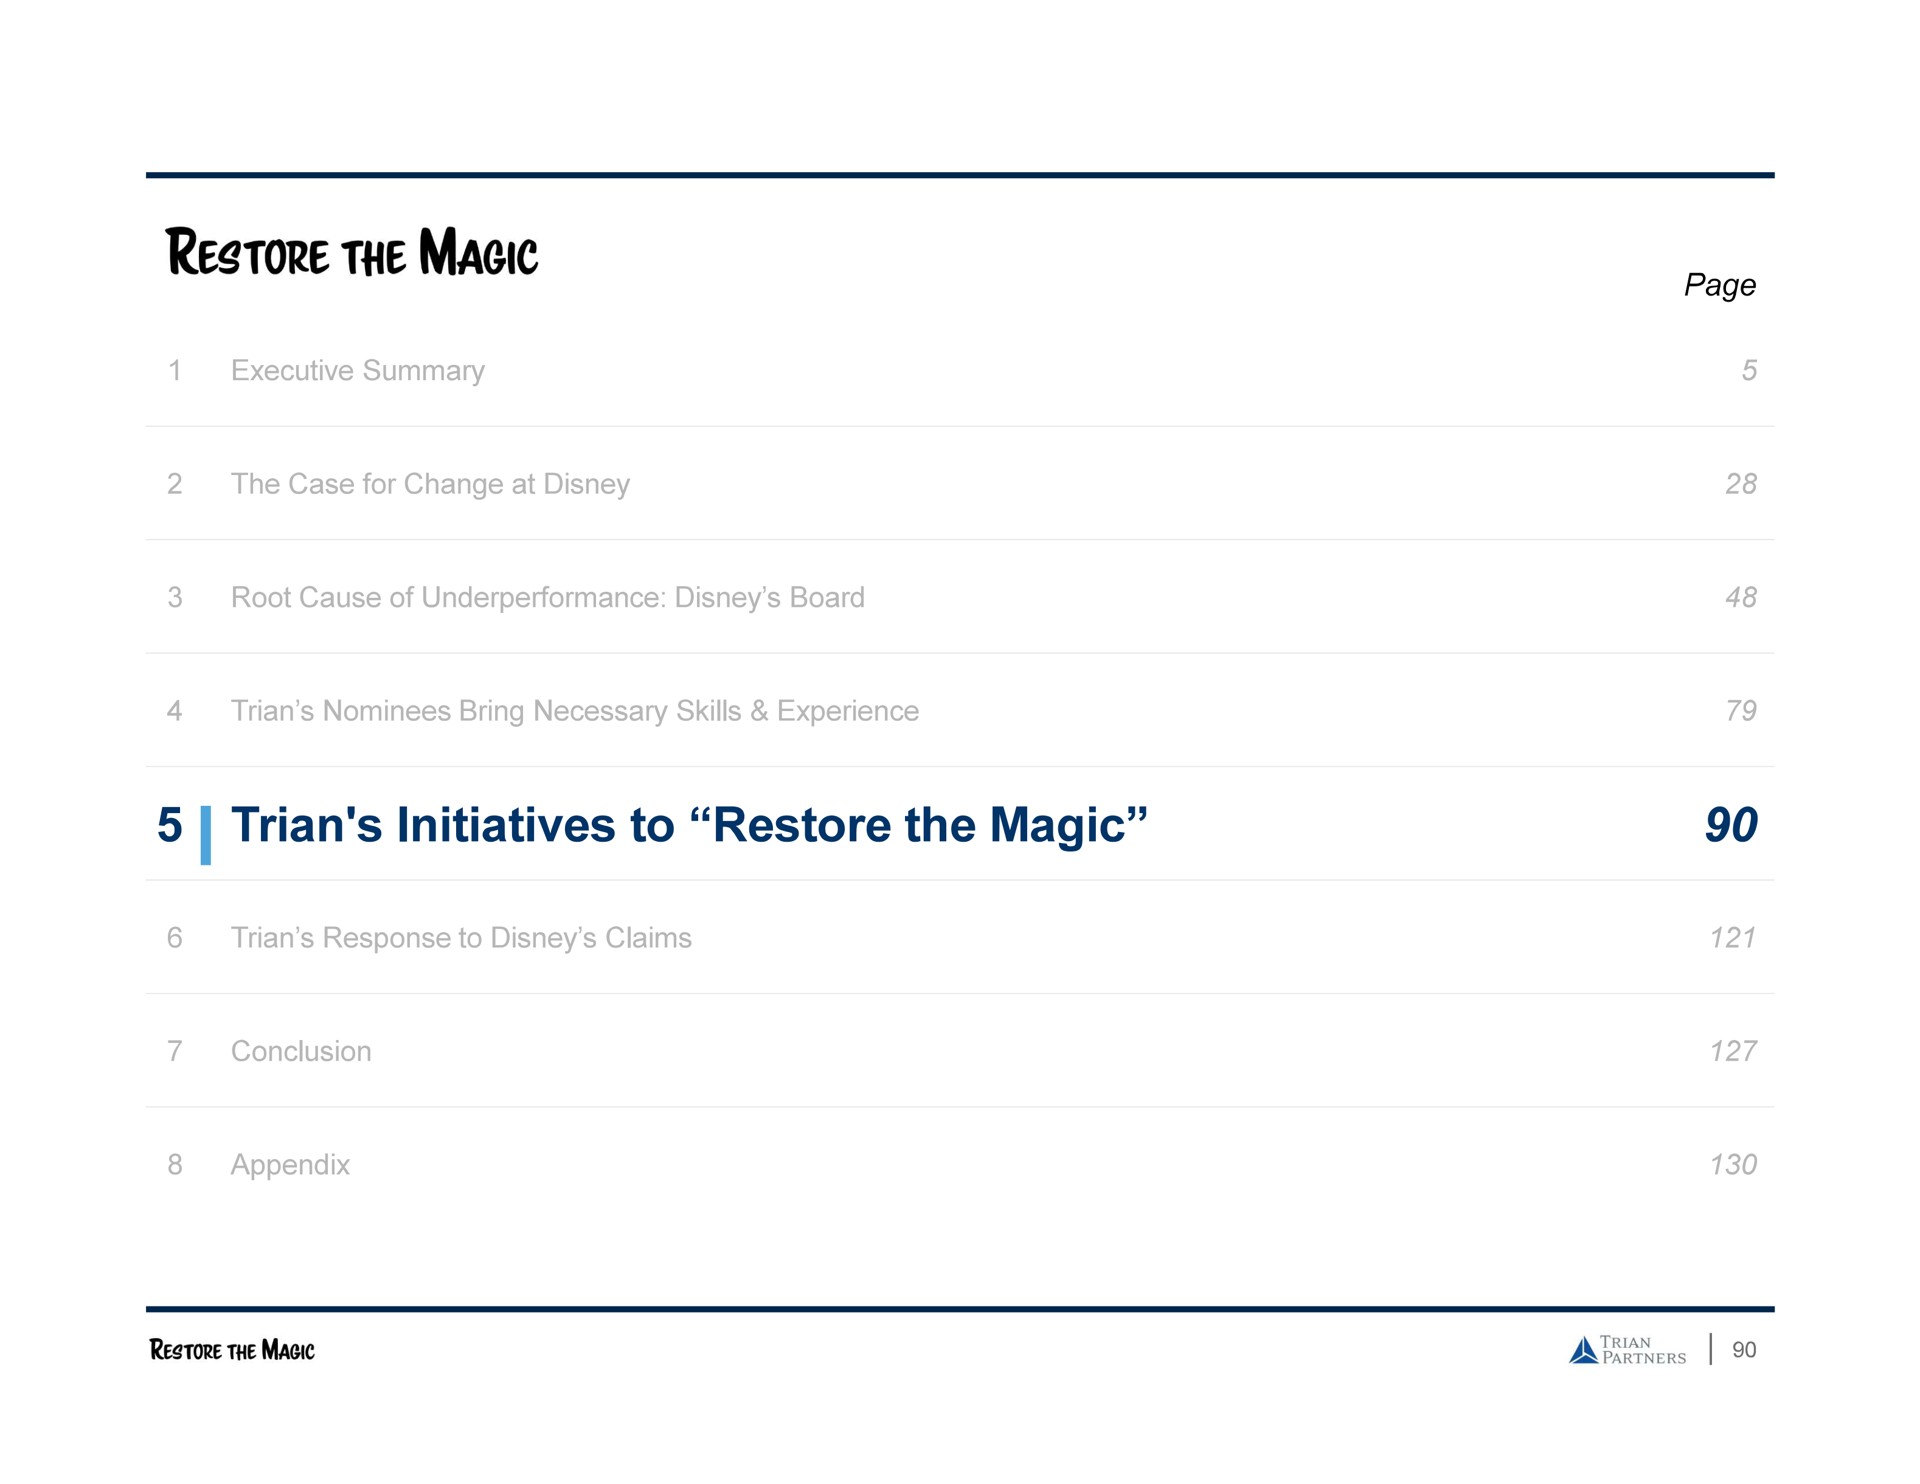 the initiatives to restore the magic | Trian Partners